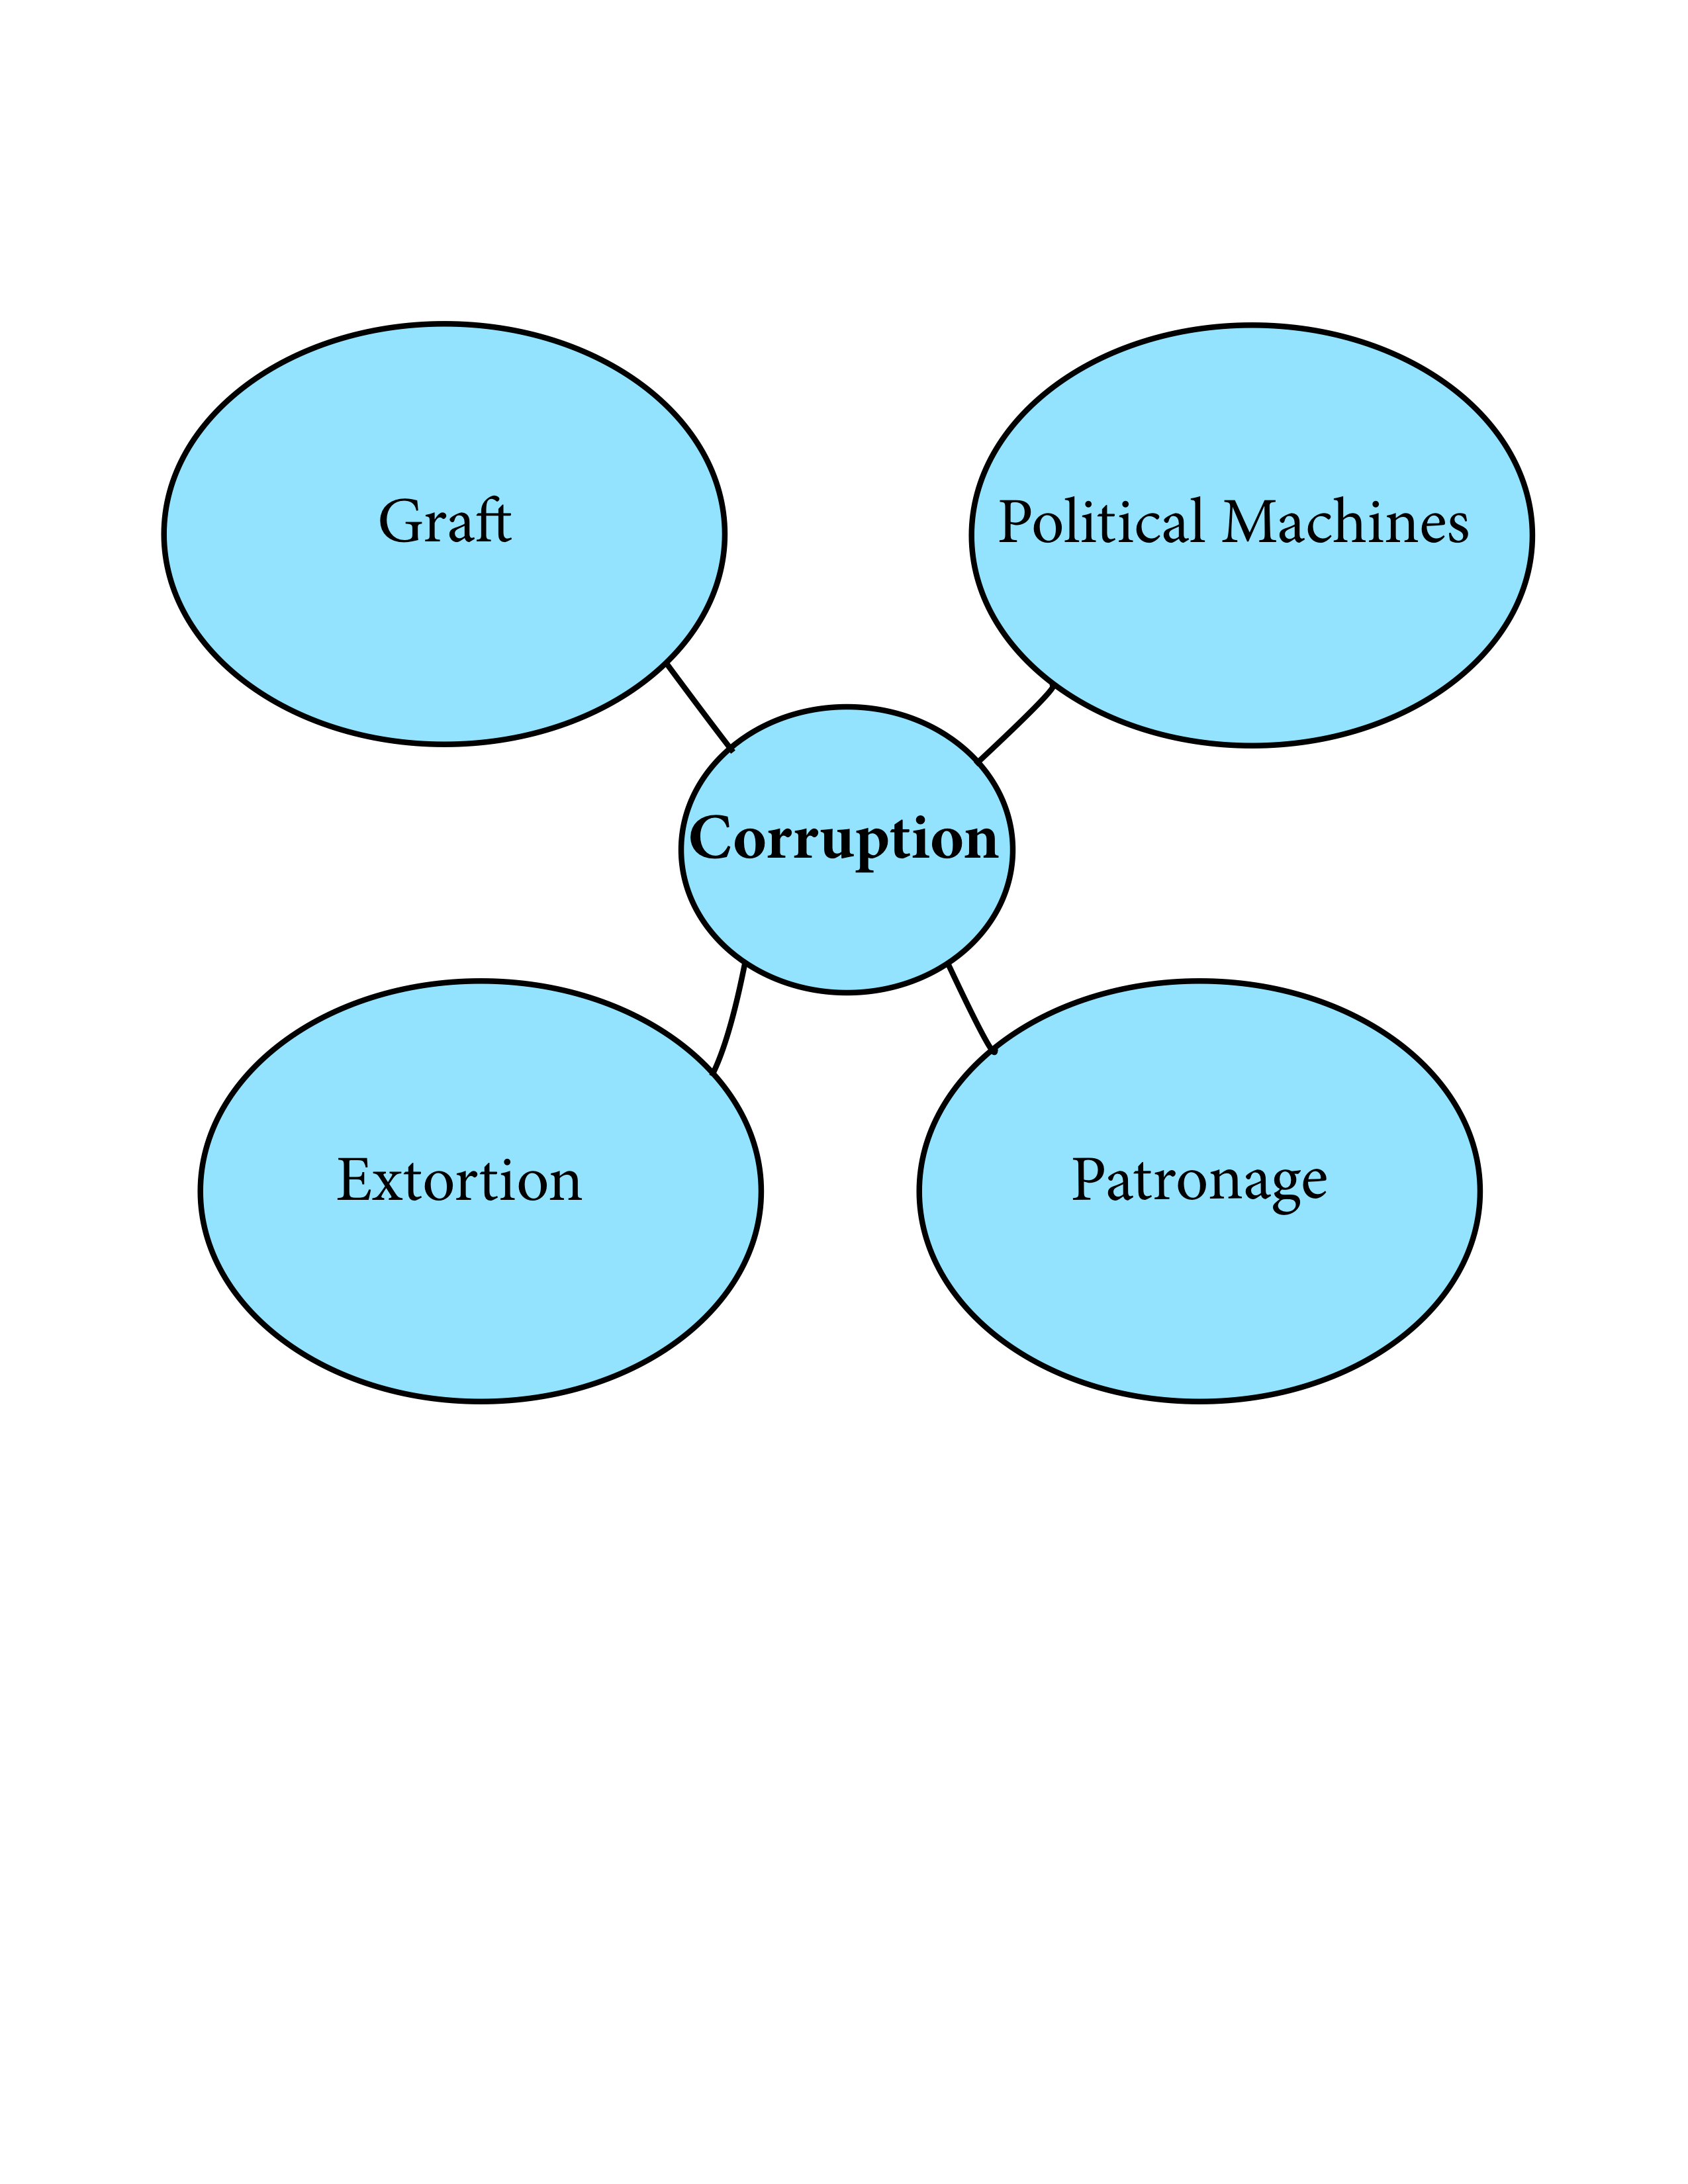 Exploring Corruption in 19th Century Politics: A List of Notorious Examples